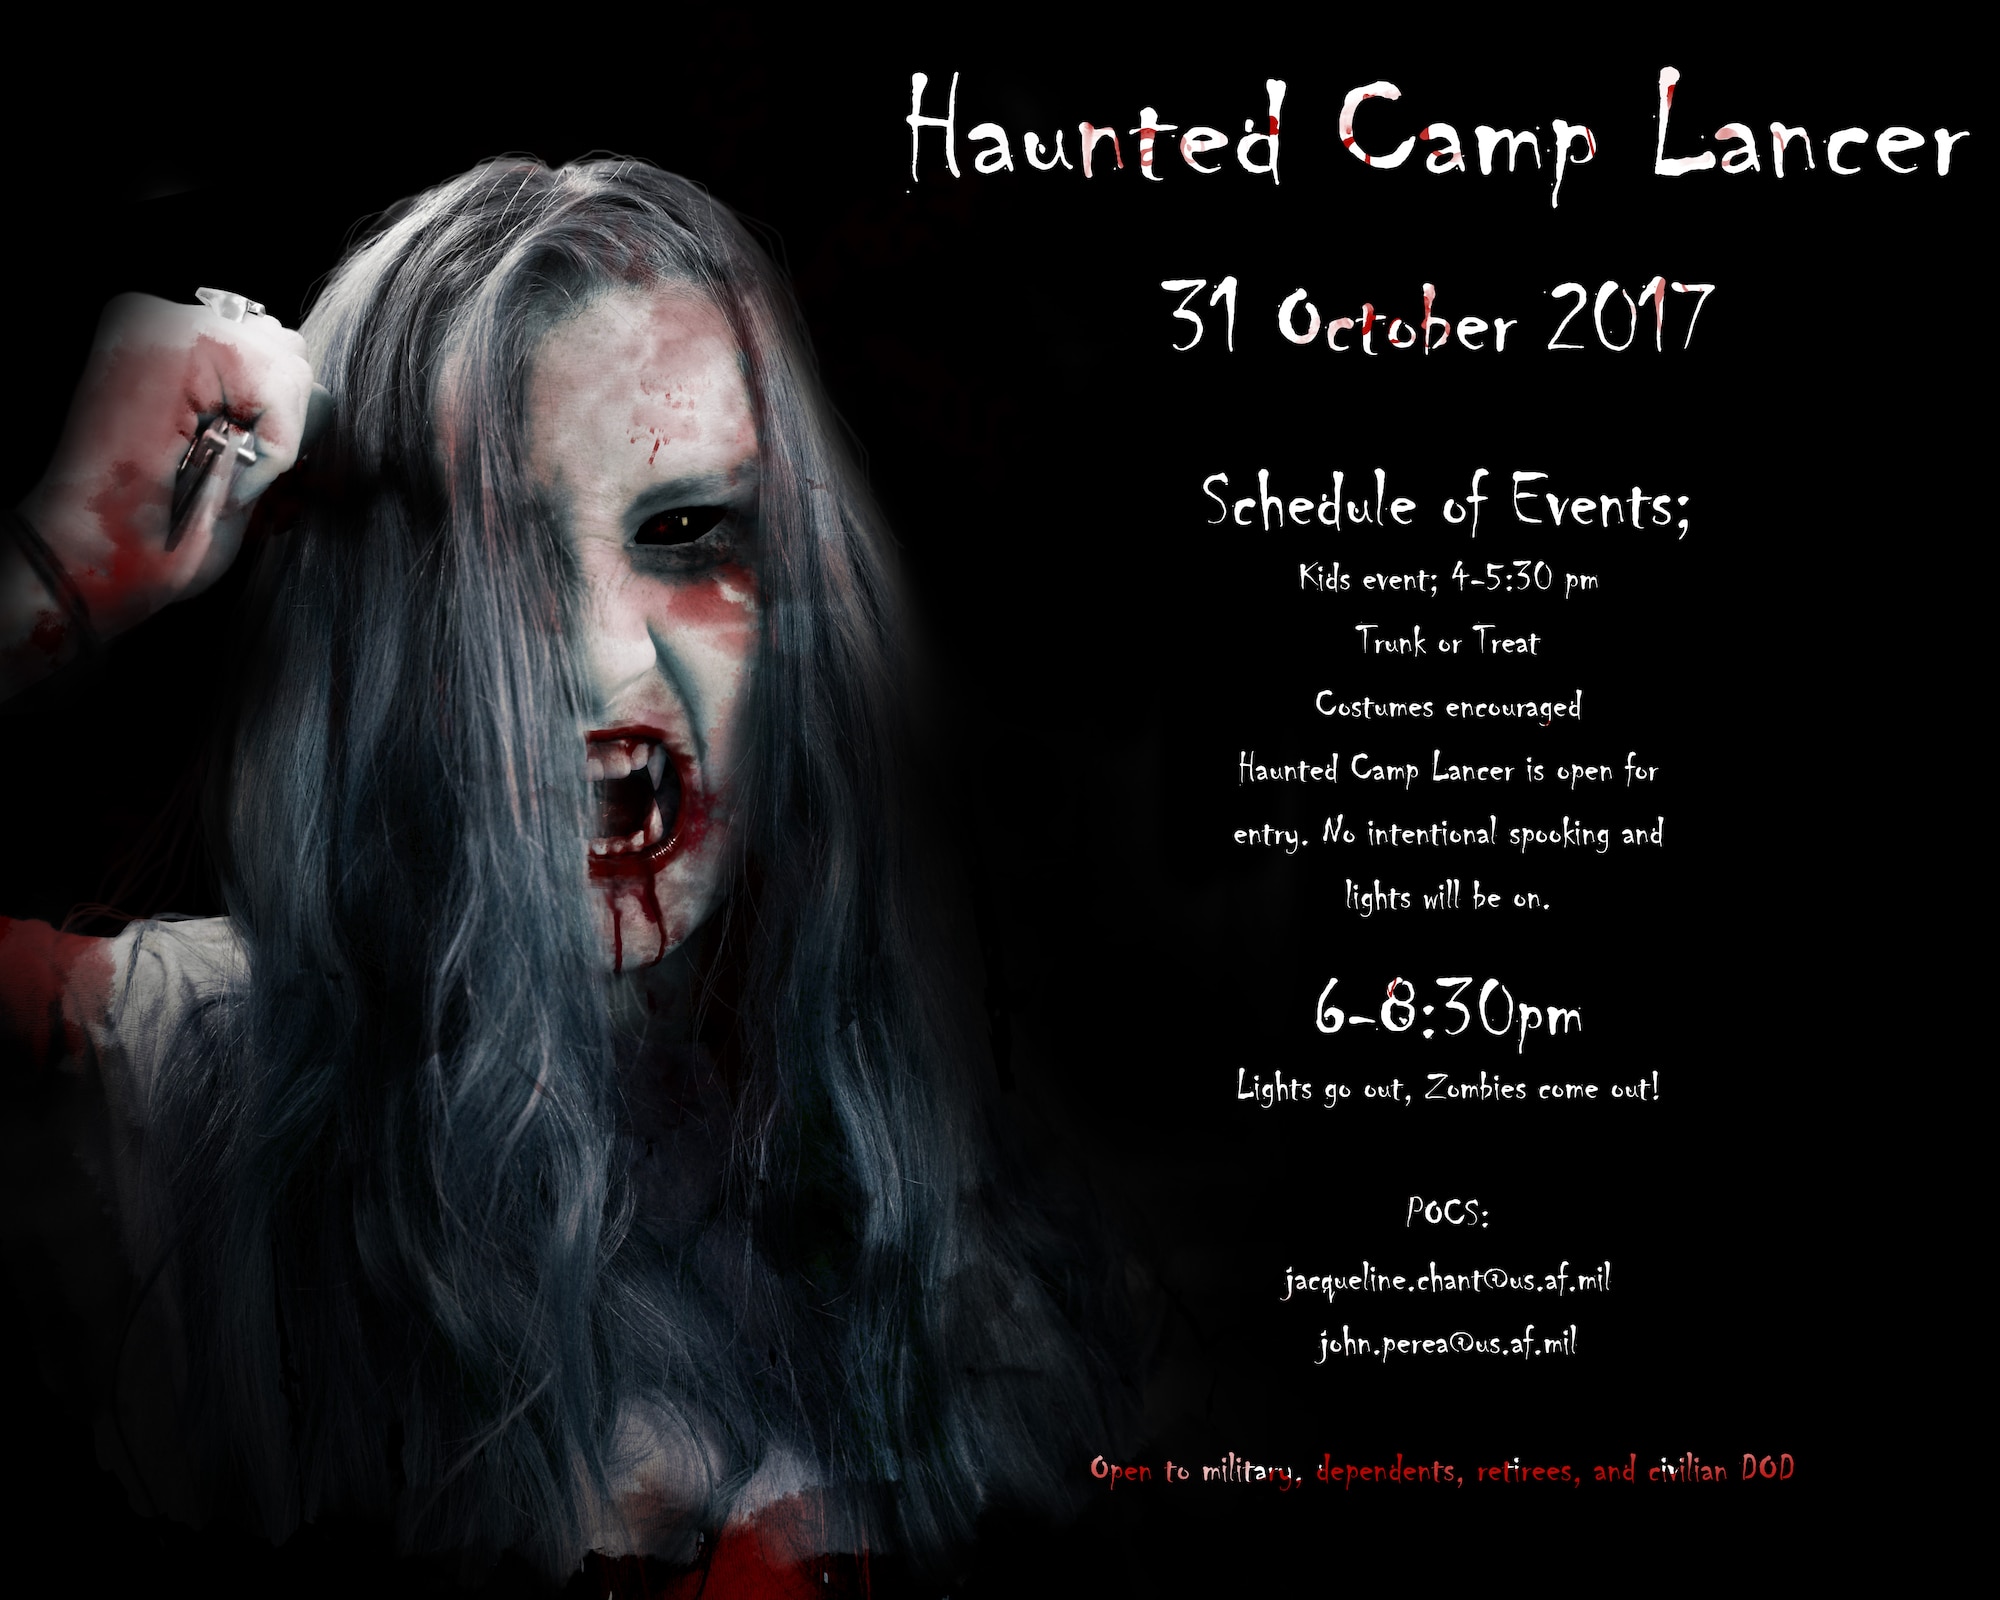 Camp Lancer Graphic V3)
Haunted Camp Lancer makes its return to Ellsworth Air Force Base, S.D., for its second year on Oct. 31, 2017. The one-night-only event offers activates for all age groups, including Trunk or Treat and haunted attractions with various spooky themes. (U.S. Air Force graphic by Staff Sgt. Sarah M. Denewellis)